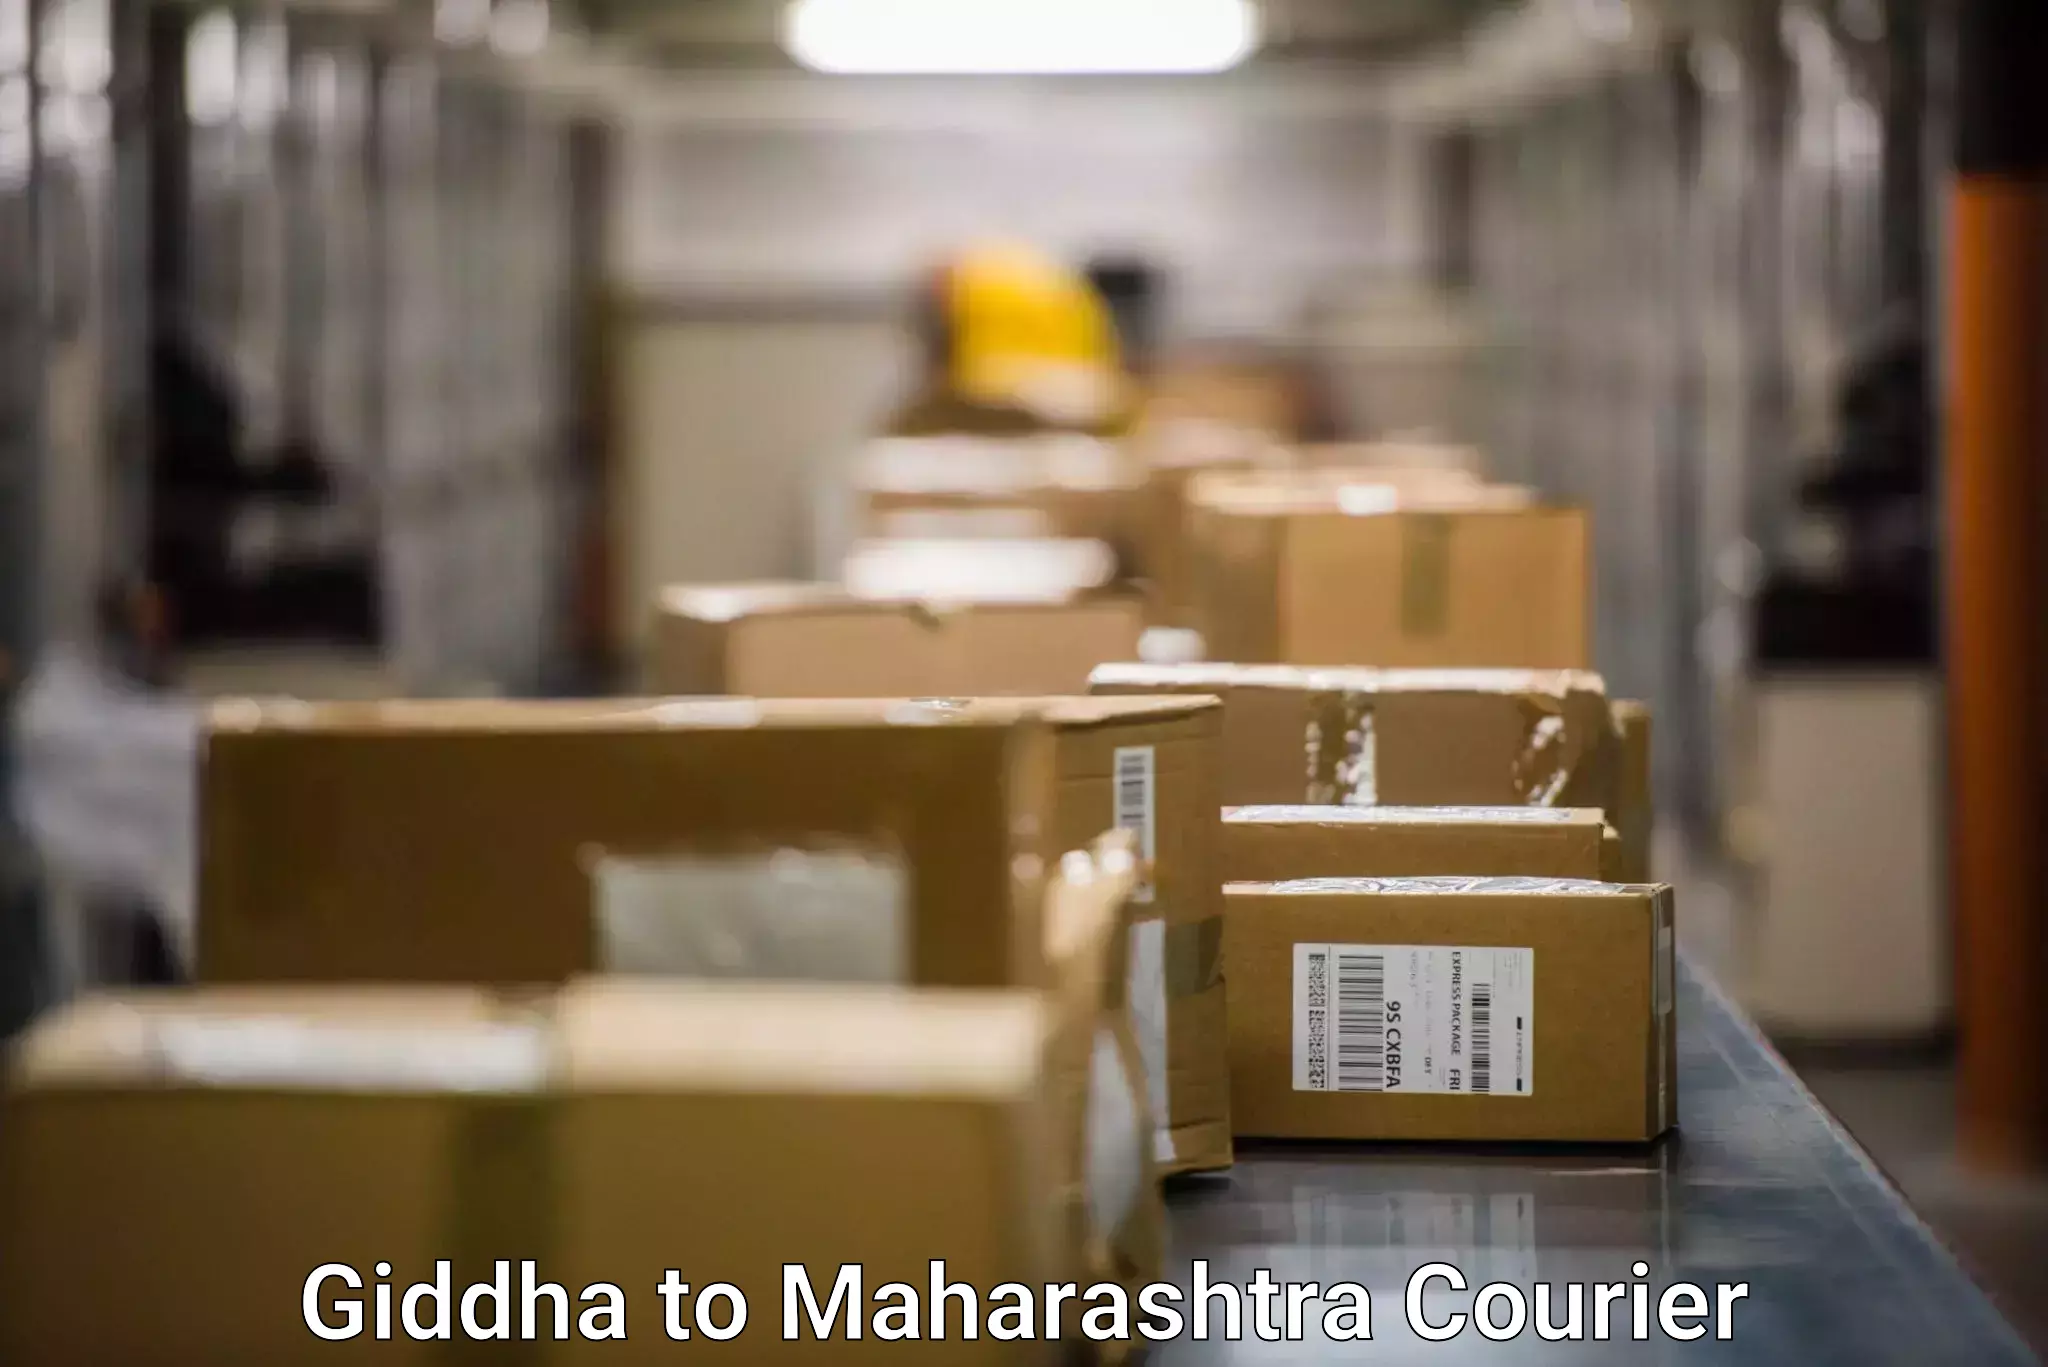 Secure freight services in Giddha to Lasalgaon